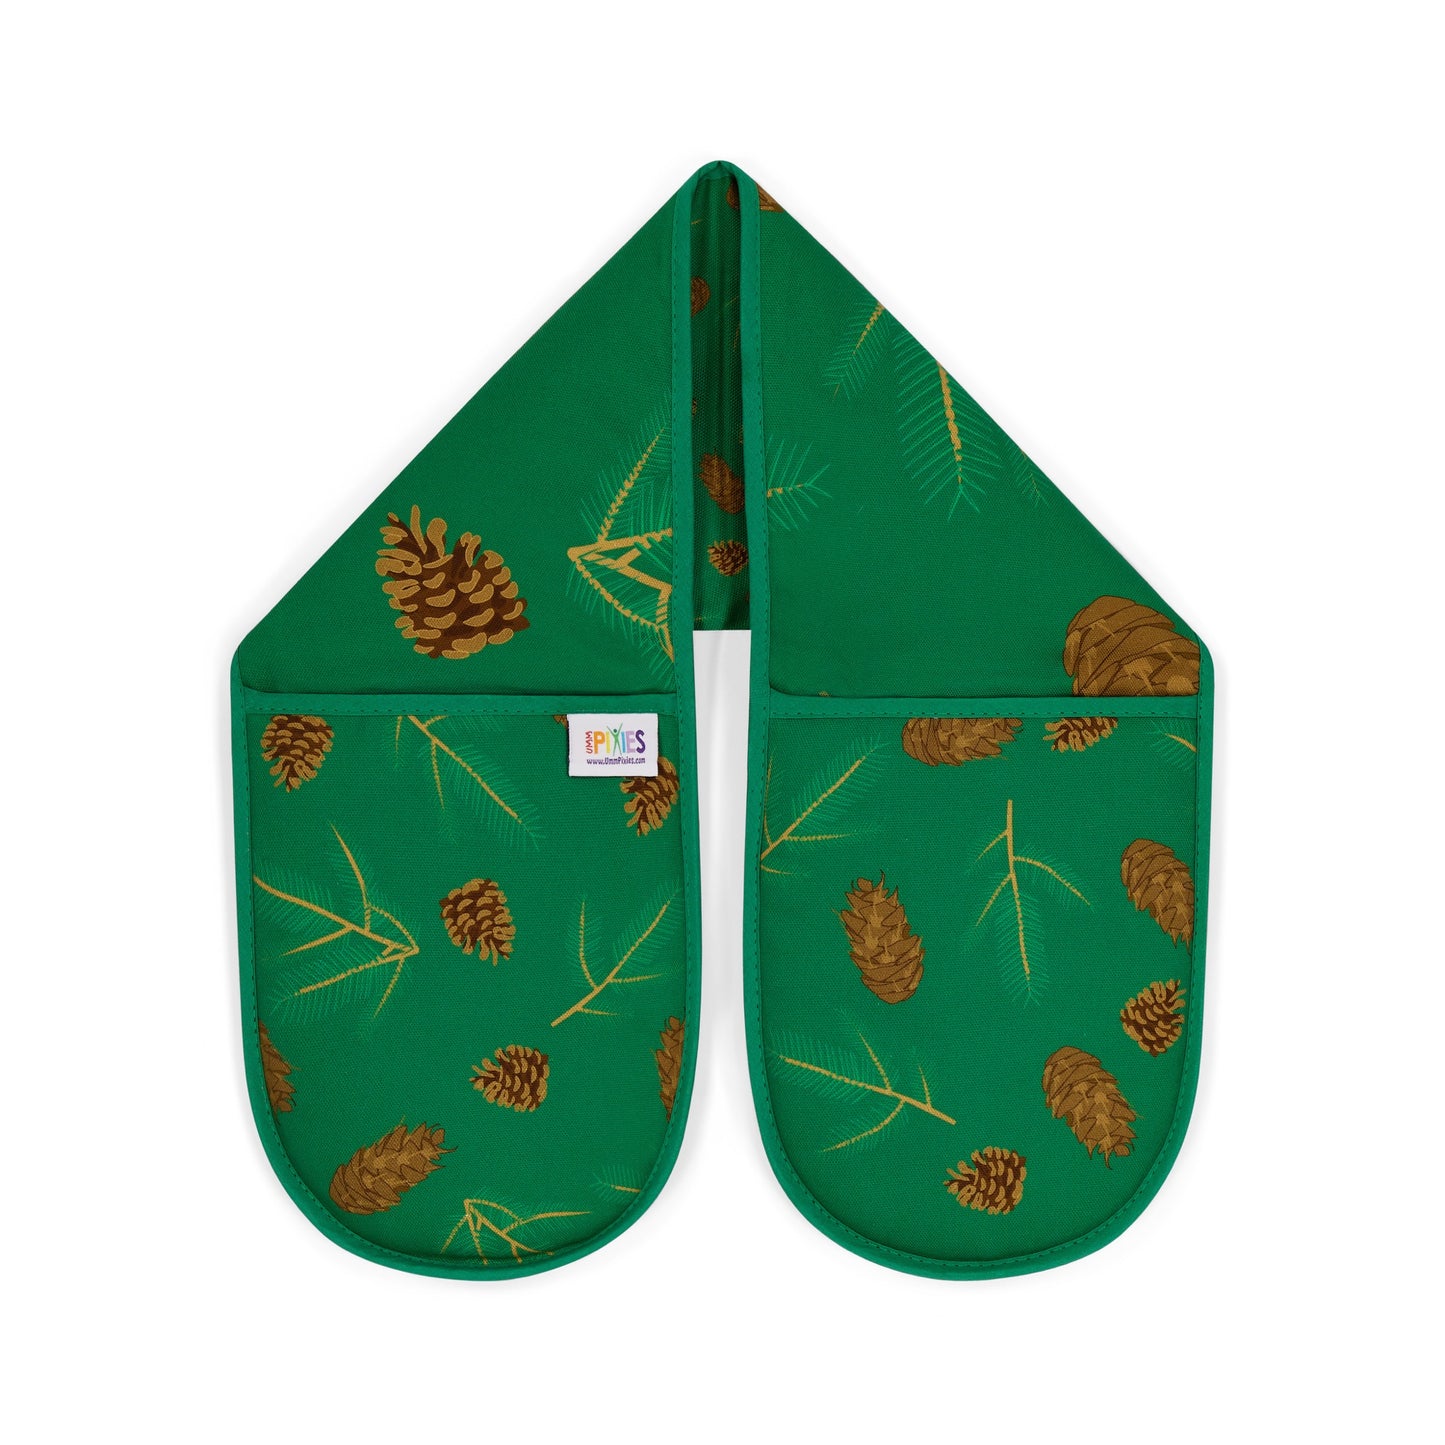 Green Cones Oven Gloves in Organic Cotton 